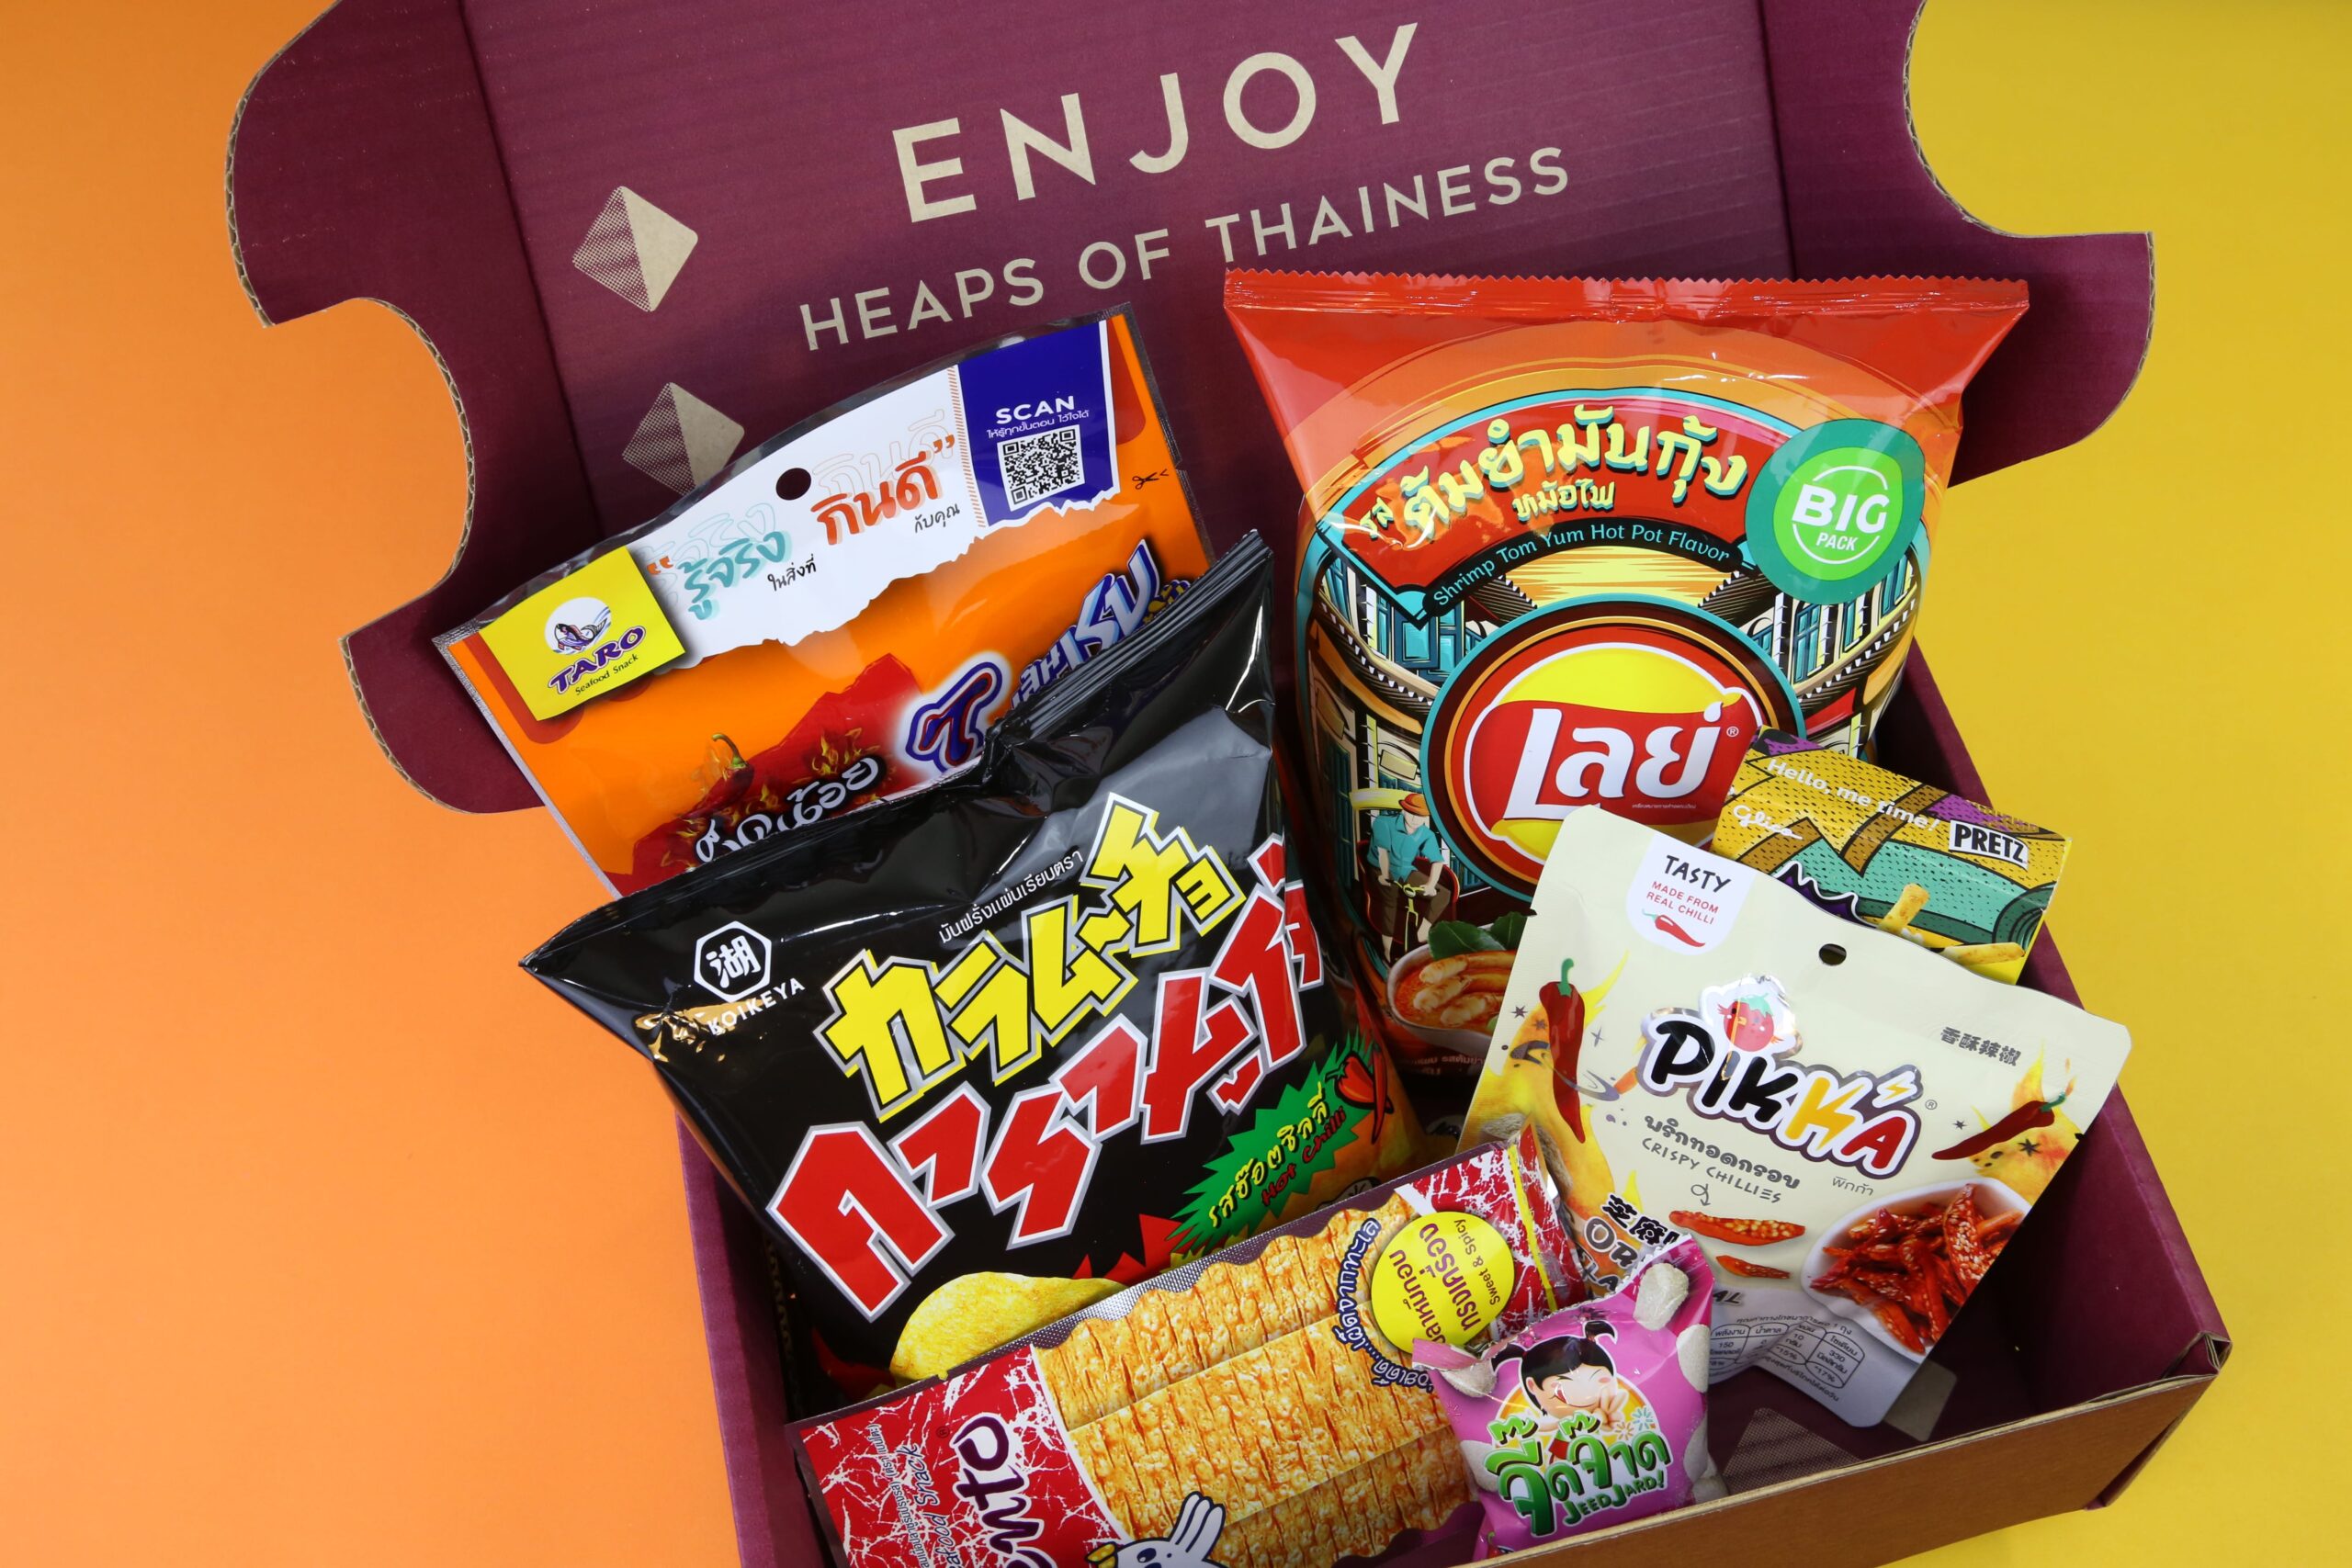 Heap brand snack box with spicy thai snacks